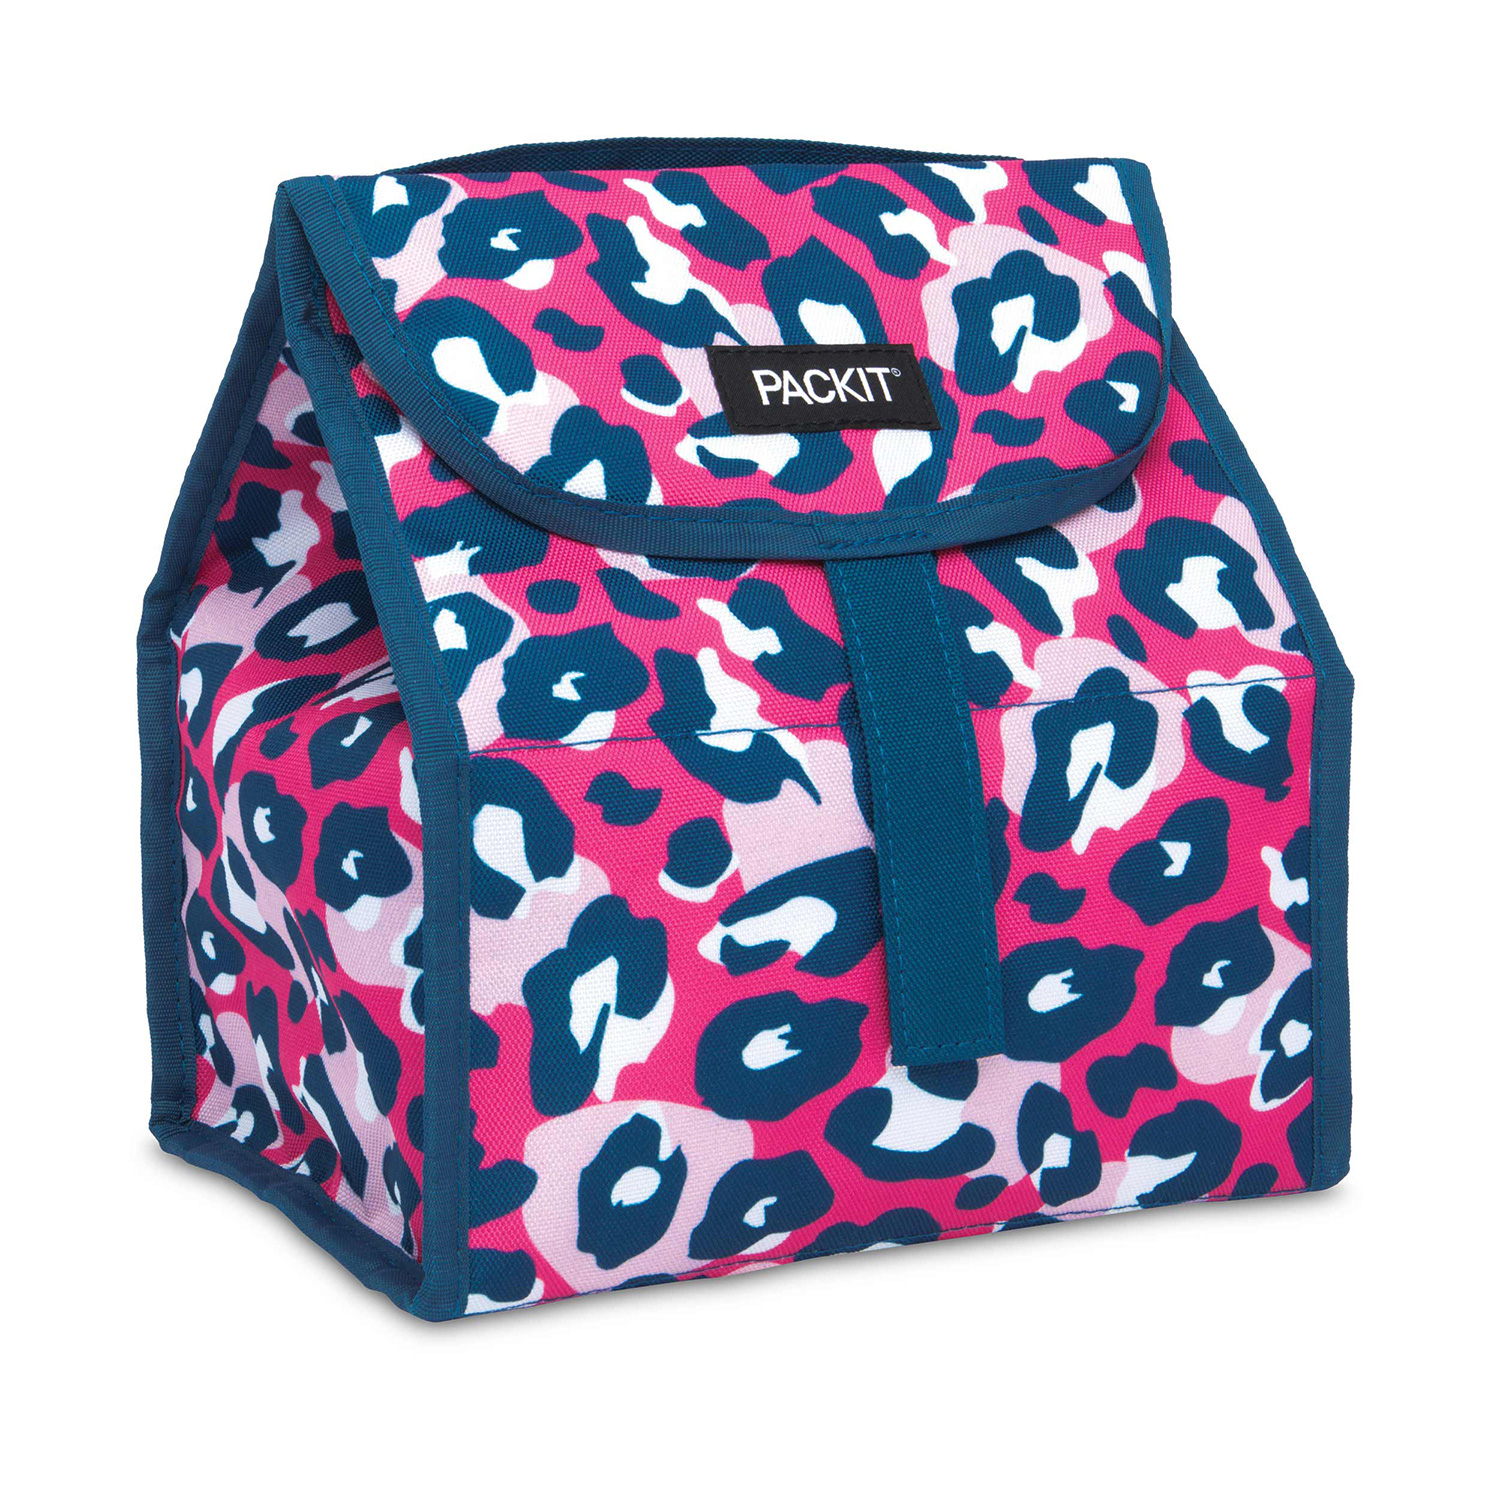 Packit Freezable Classic Lunch Box Wild Leopard Blue Pink Orange Bag  Container